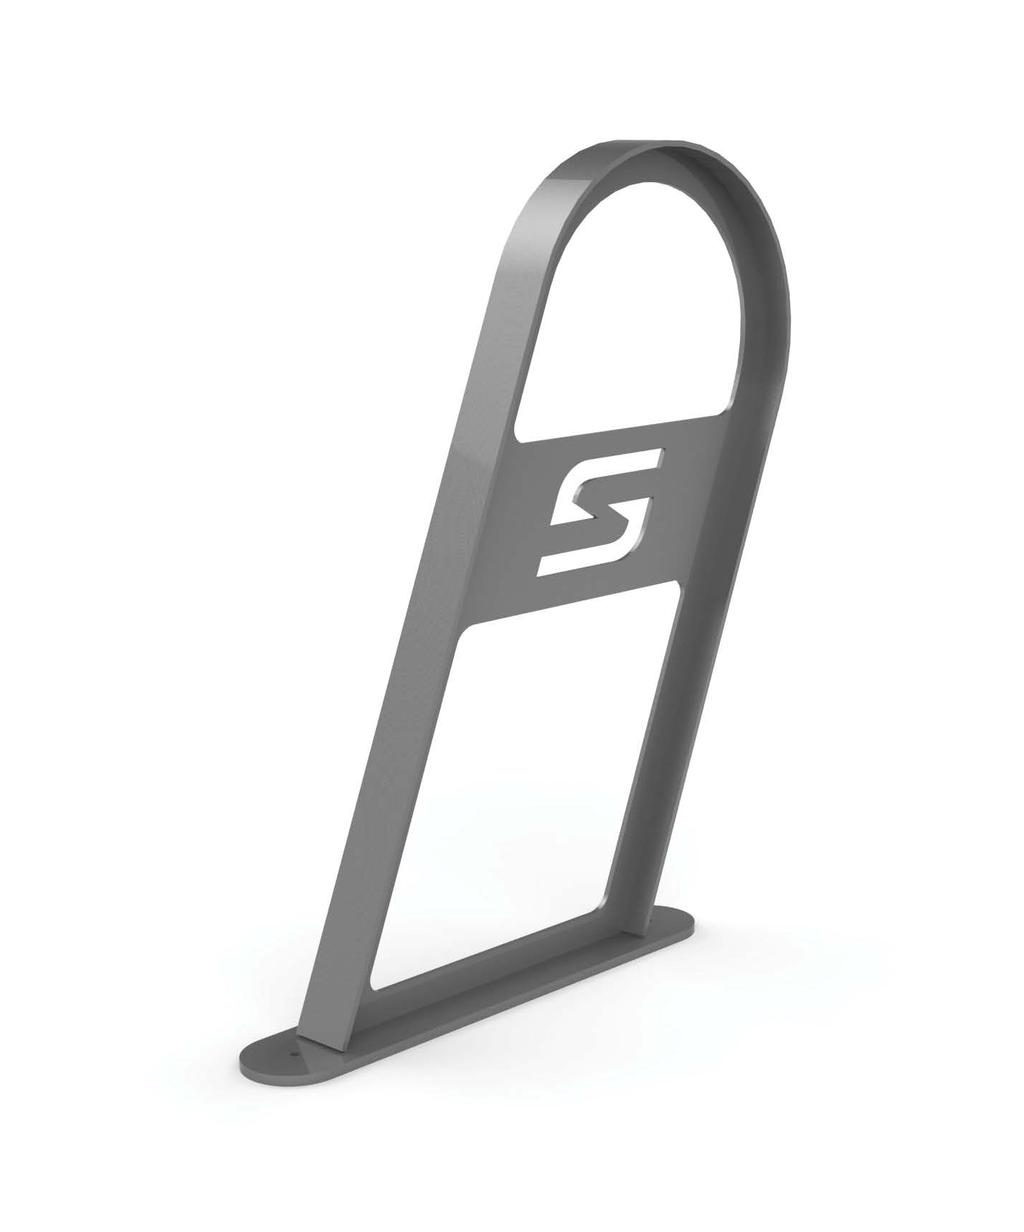 68 2018 PRODUCT CATALOG DISCOVER US ON 69 commercial racks THE BACKBONE LoaD: 1 OR 2 BIKES Item: 75090 Accepts bikes on